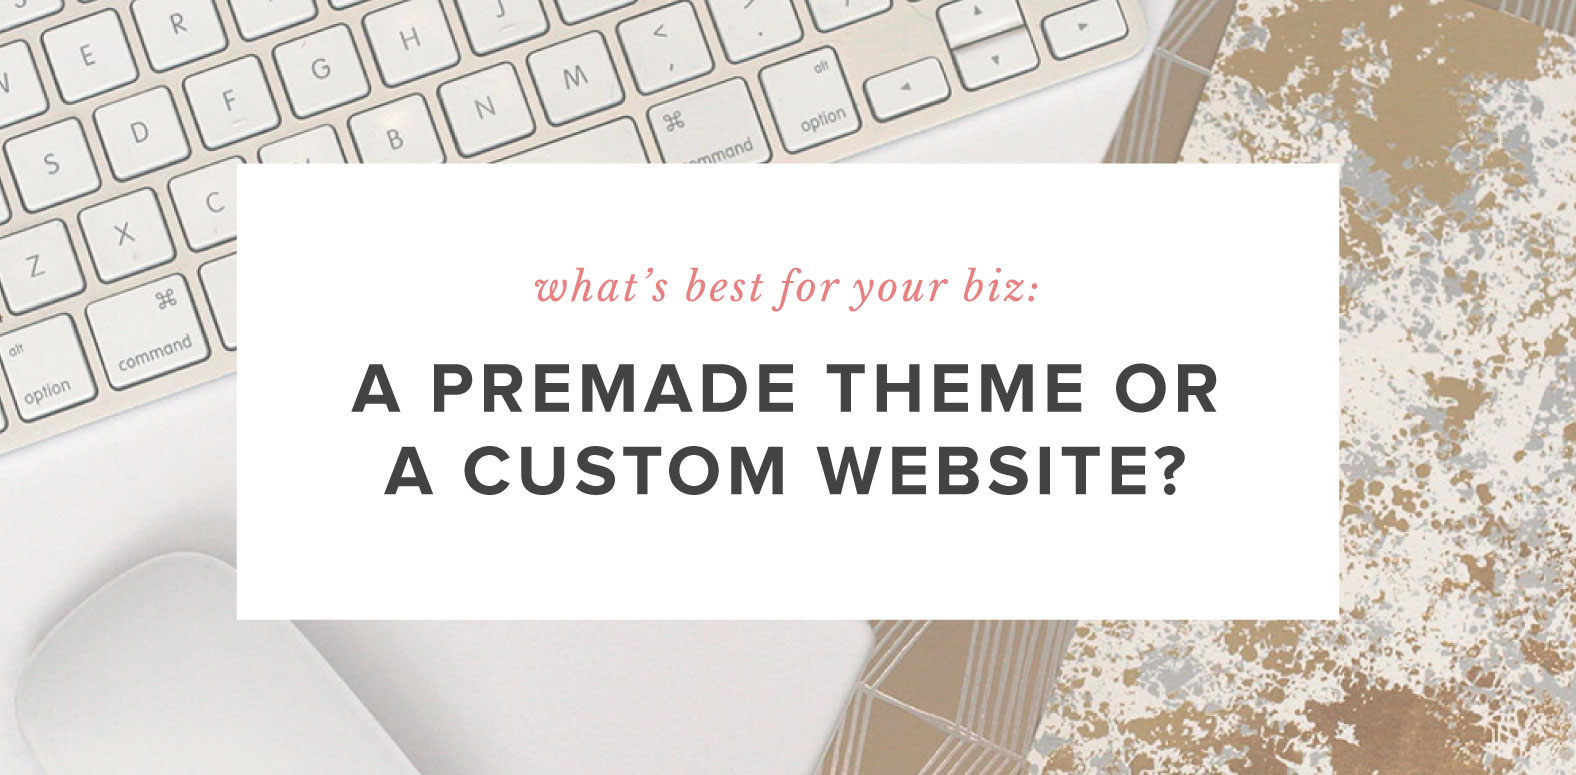 What’s Best for Your Biz: A Premade Theme or a Custom Website?